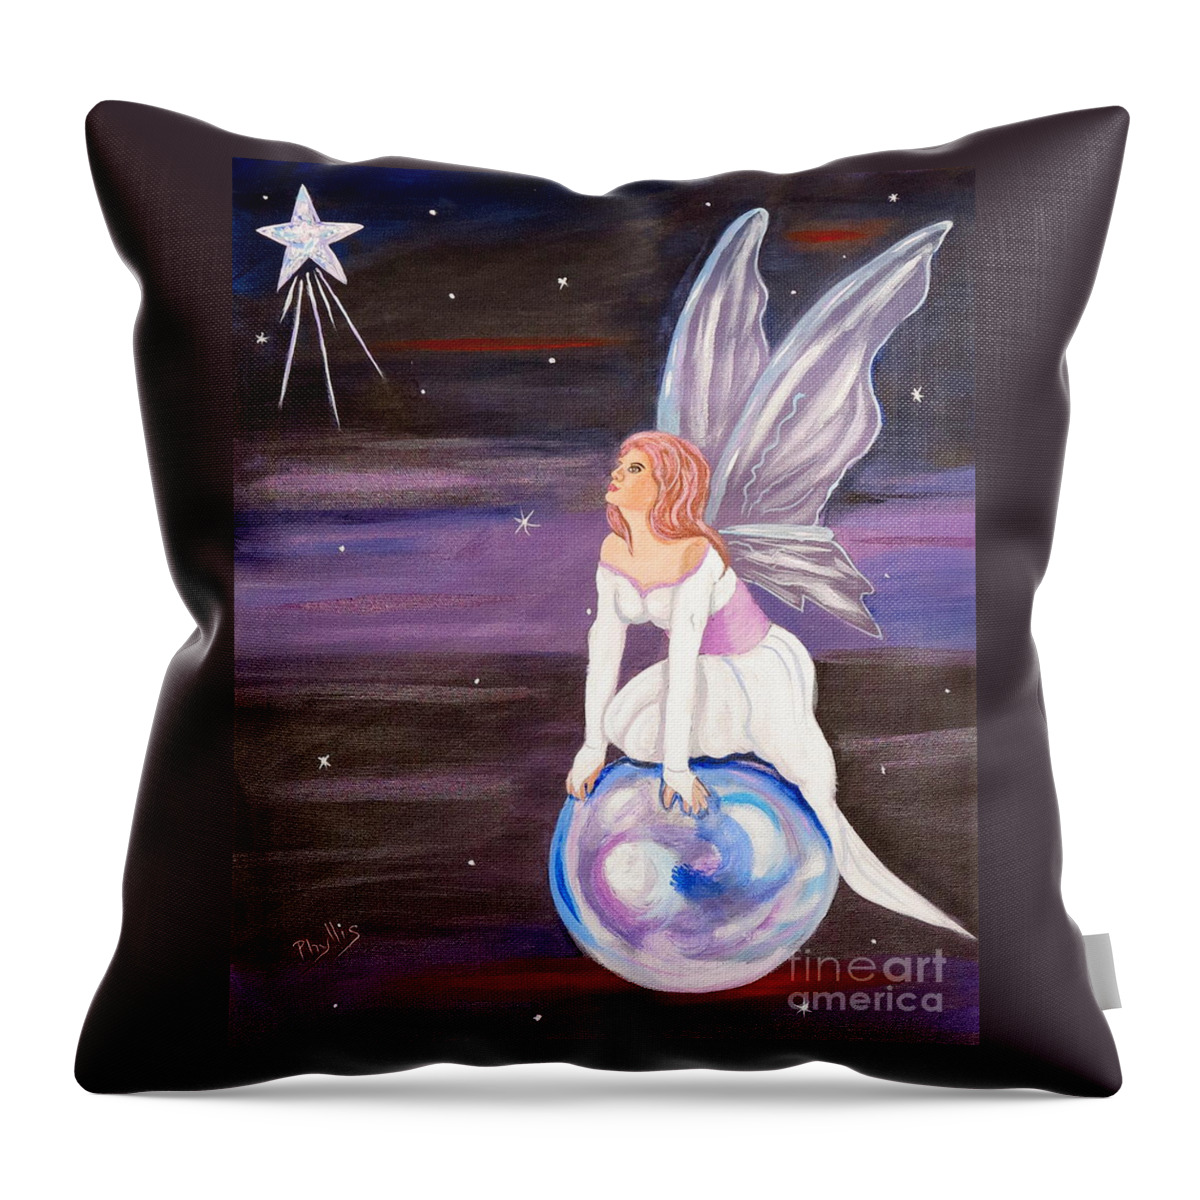 Angel Throw Pillow featuring the painting When You Dream by Phyllis Kaltenbach